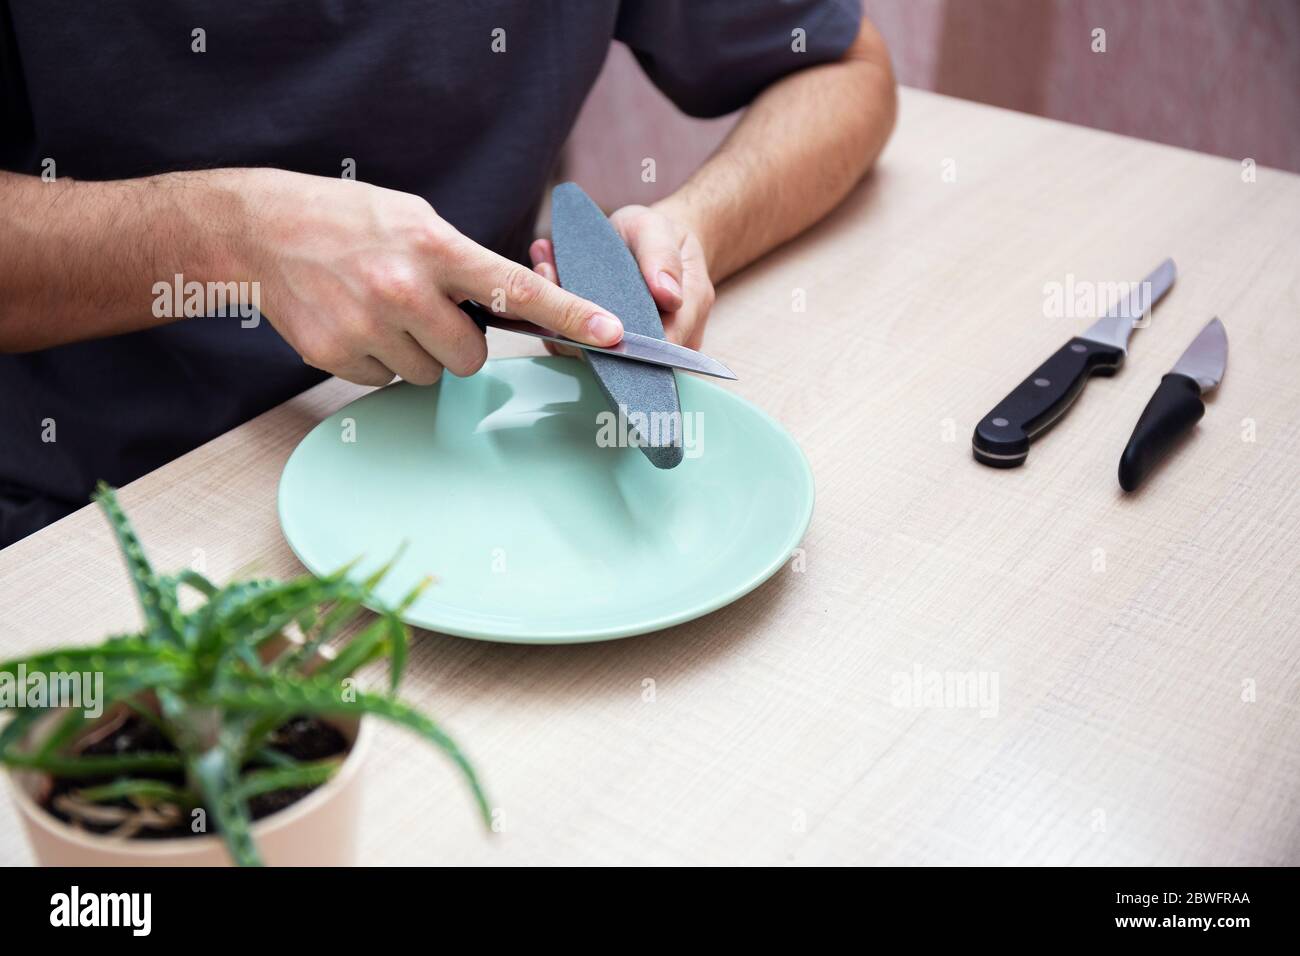 Close-up strong male hands sharpen a kitchen metal knife with a grindstone. Home household knife sharpening. Stock Photo